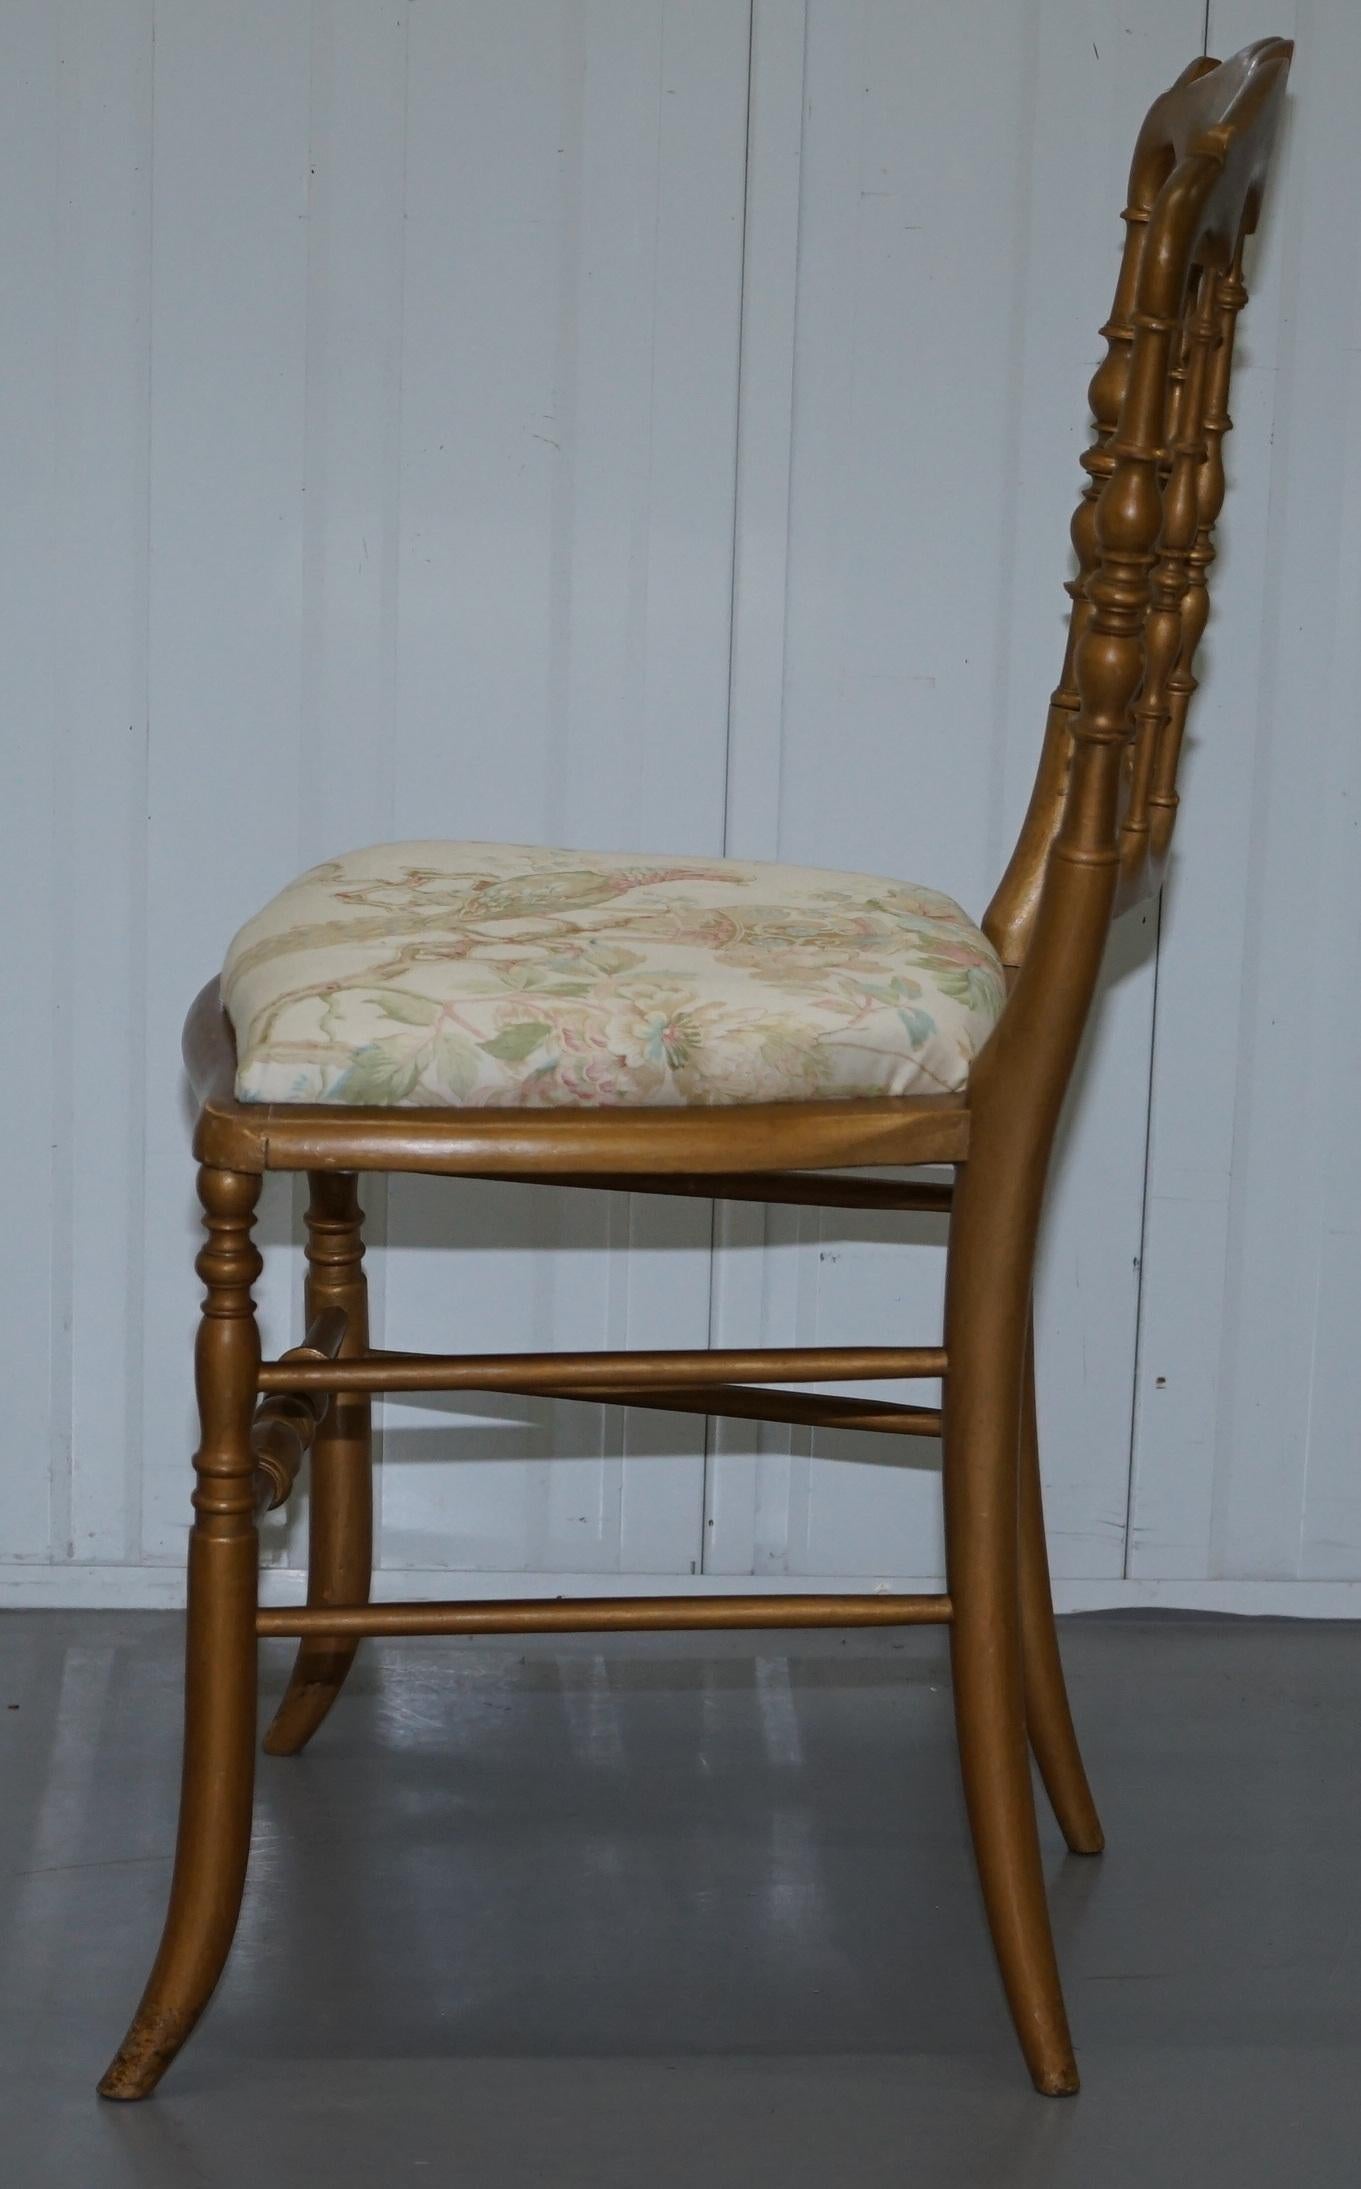 Regency Style Gold Giltwood Spindle Chair circa 1900 Ornate Bird Upholstery For Sale 9